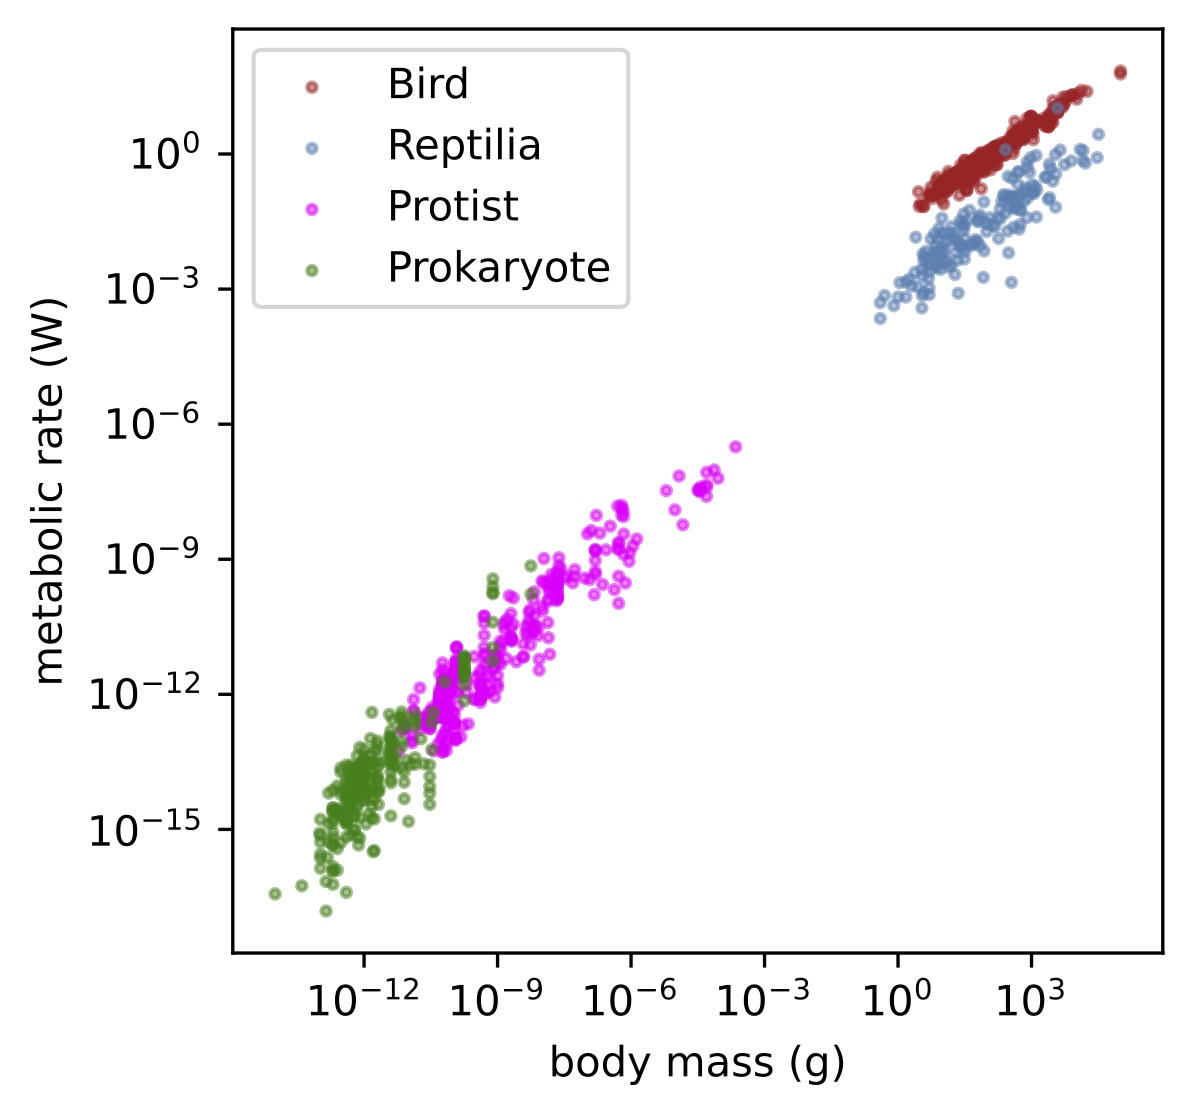 Basal metabolic rates vs. body masses for different species.